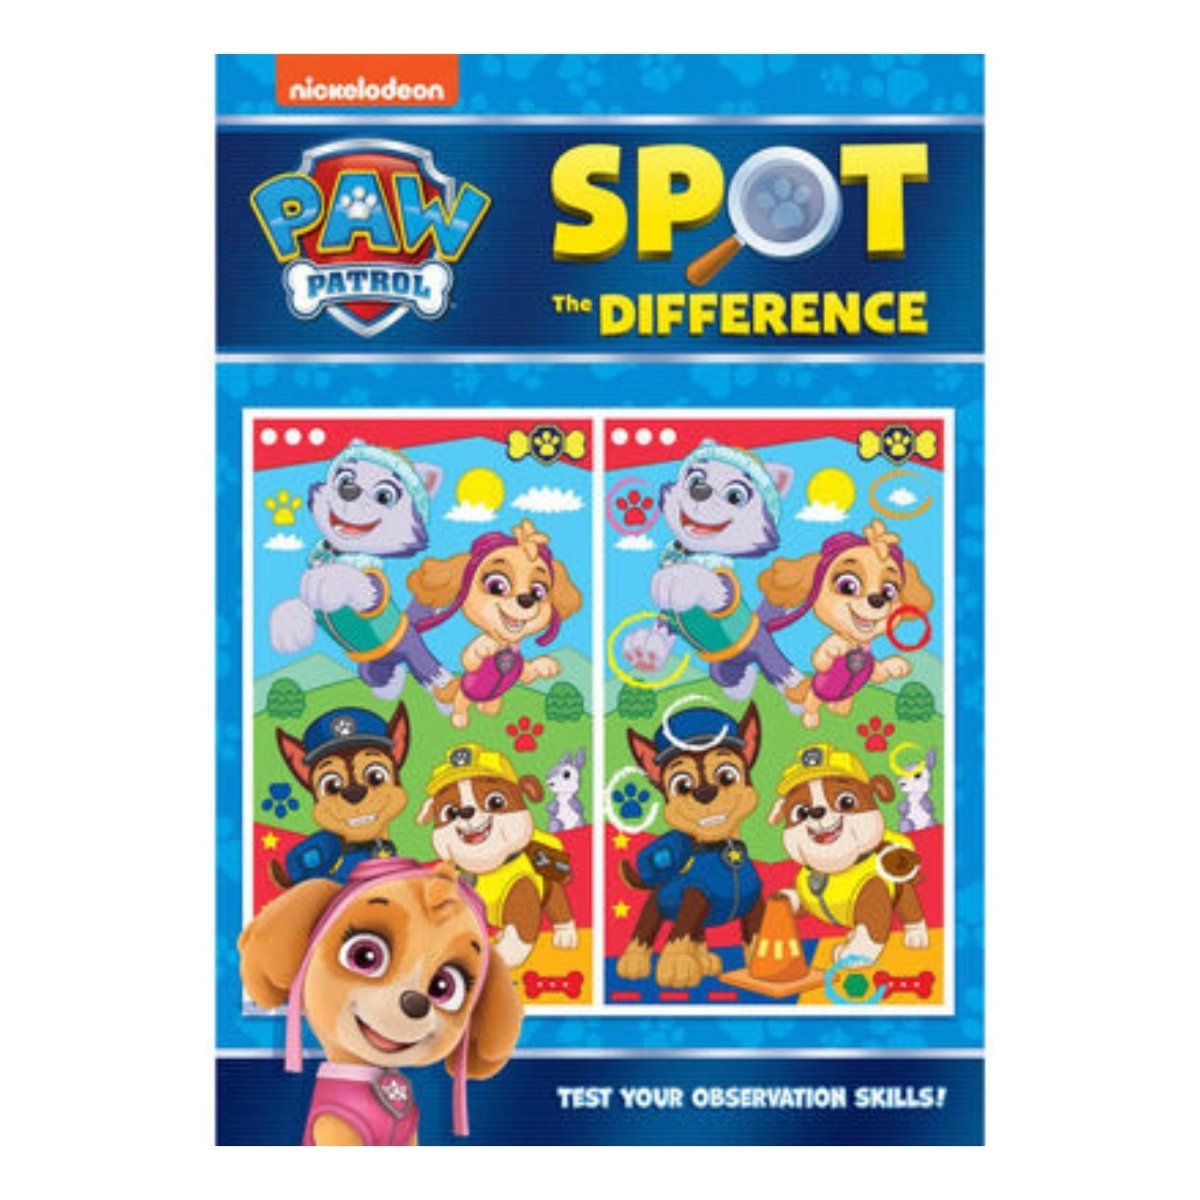 Paw Patrol Spot the Difference Book - Kids Party Craft